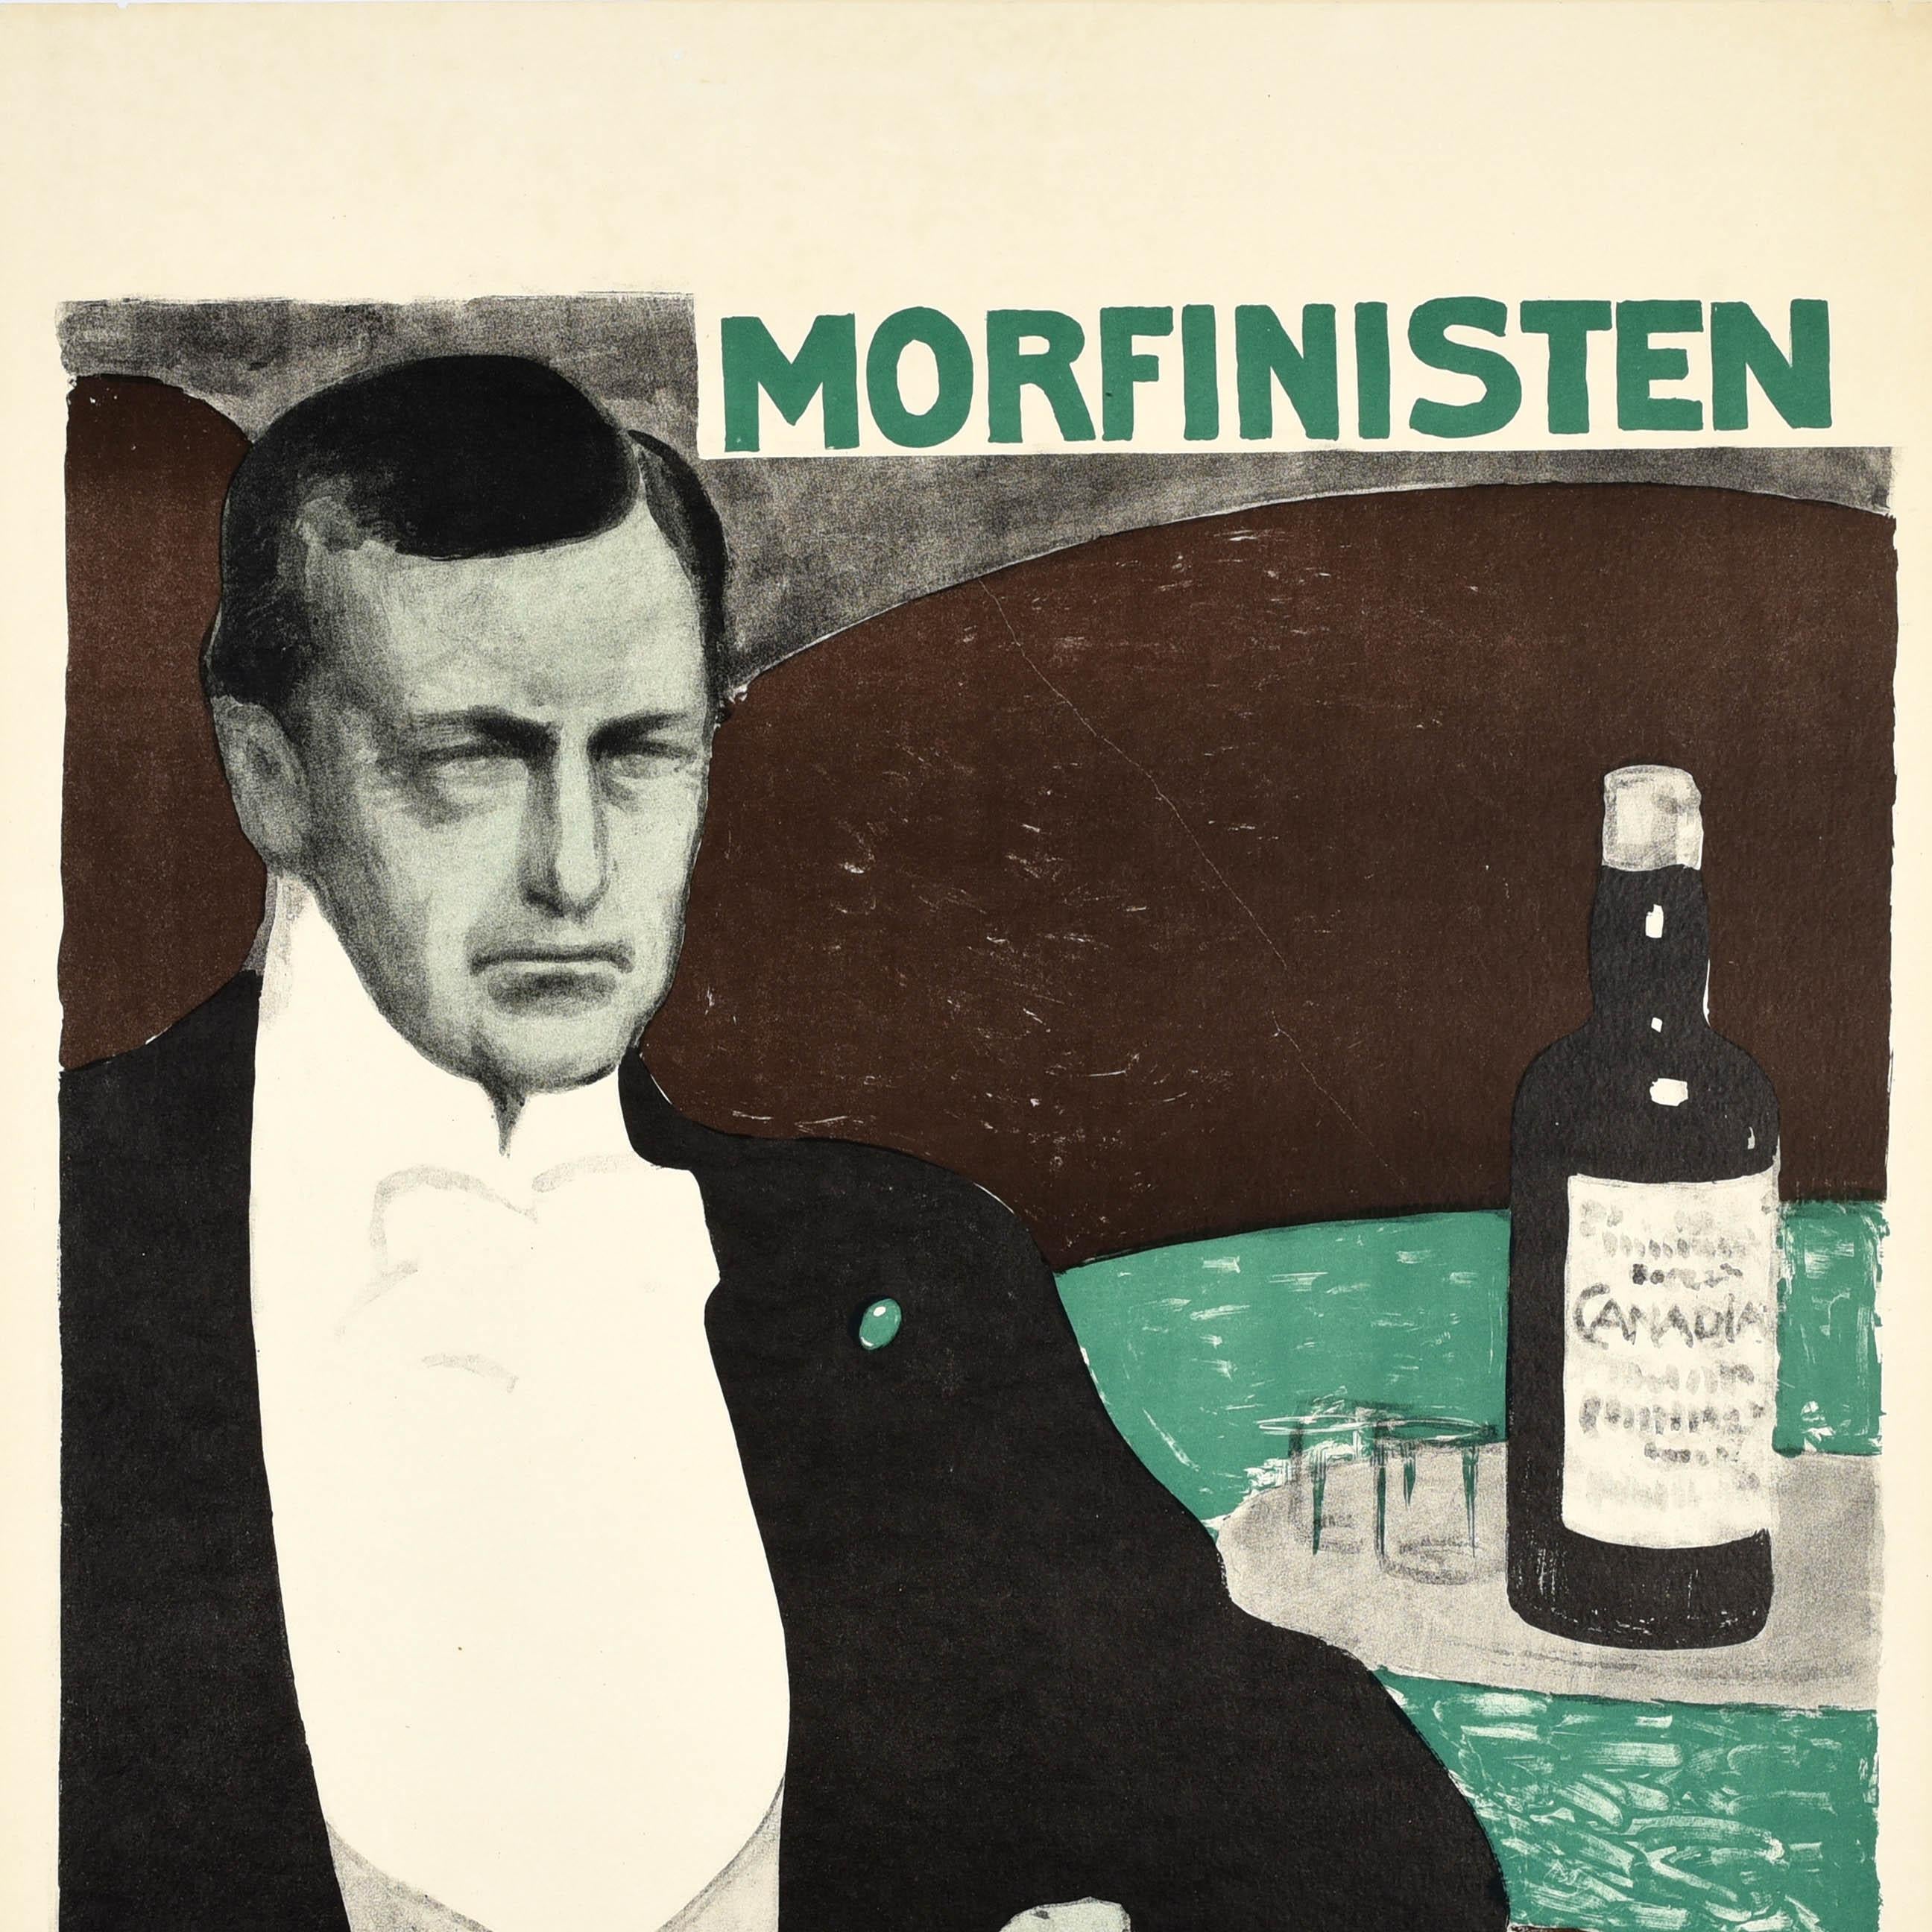 Original antique movie poster for the 1911 short film The Morphine Takers / Morfinisten directed by Louis von Kohl and starring Lili Beck, Alfred Cohn and Vera Fjelstrup features a well-dressed gentleman drug addict holding a needle with a jar of